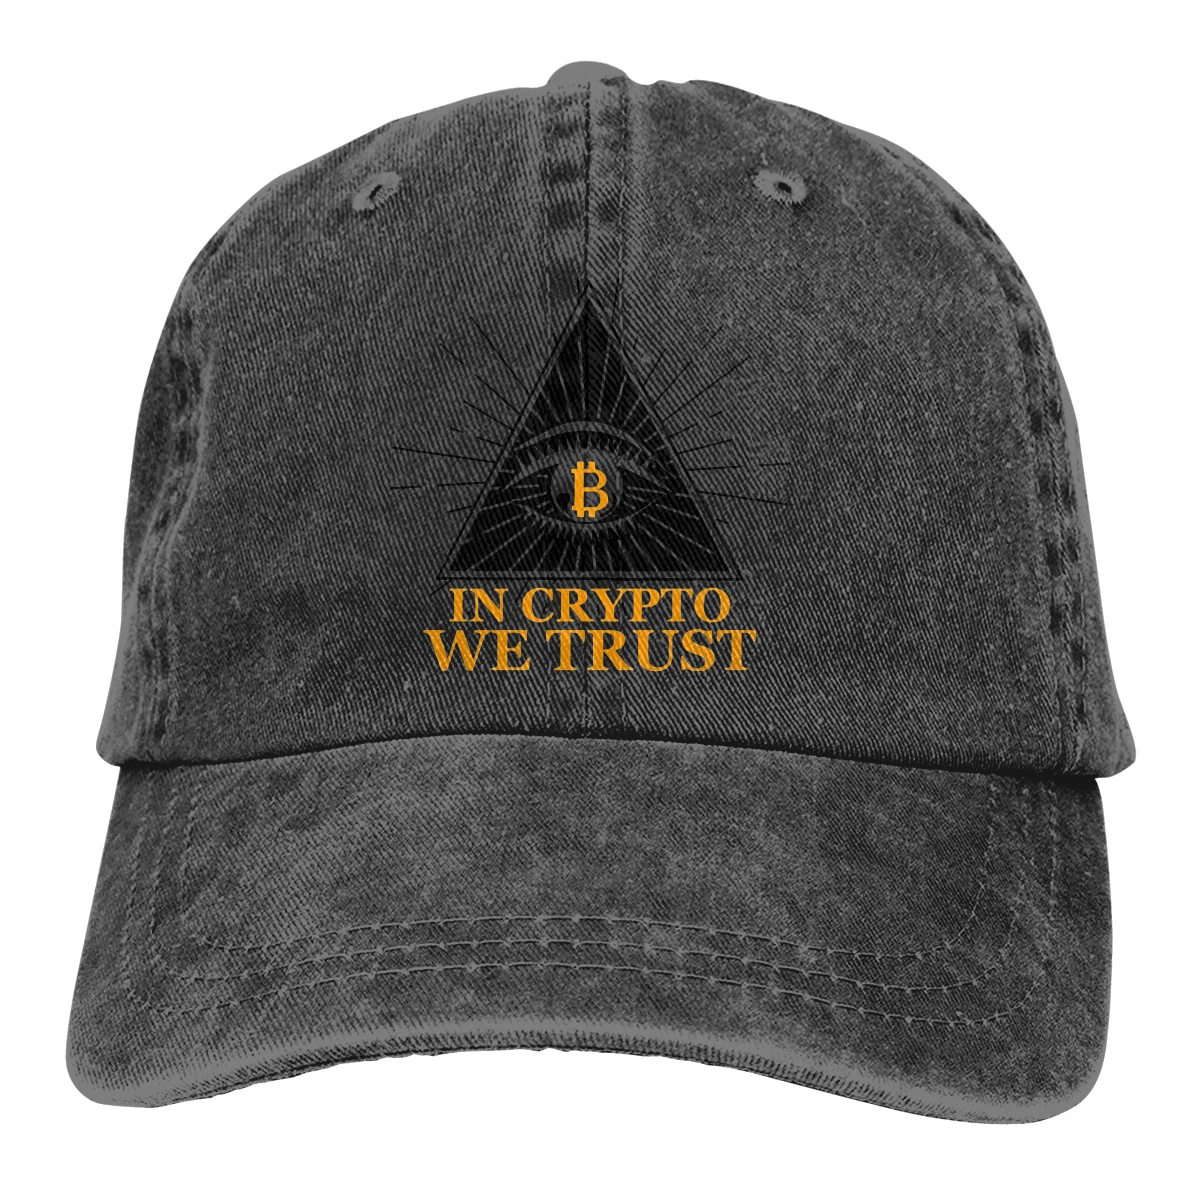 

Summer Cap Sun Visor In Crypto We Trust Eyes Black Hip Hop Caps Bitcoin Cryptocurrency Cowboy Hat Peaked Hats